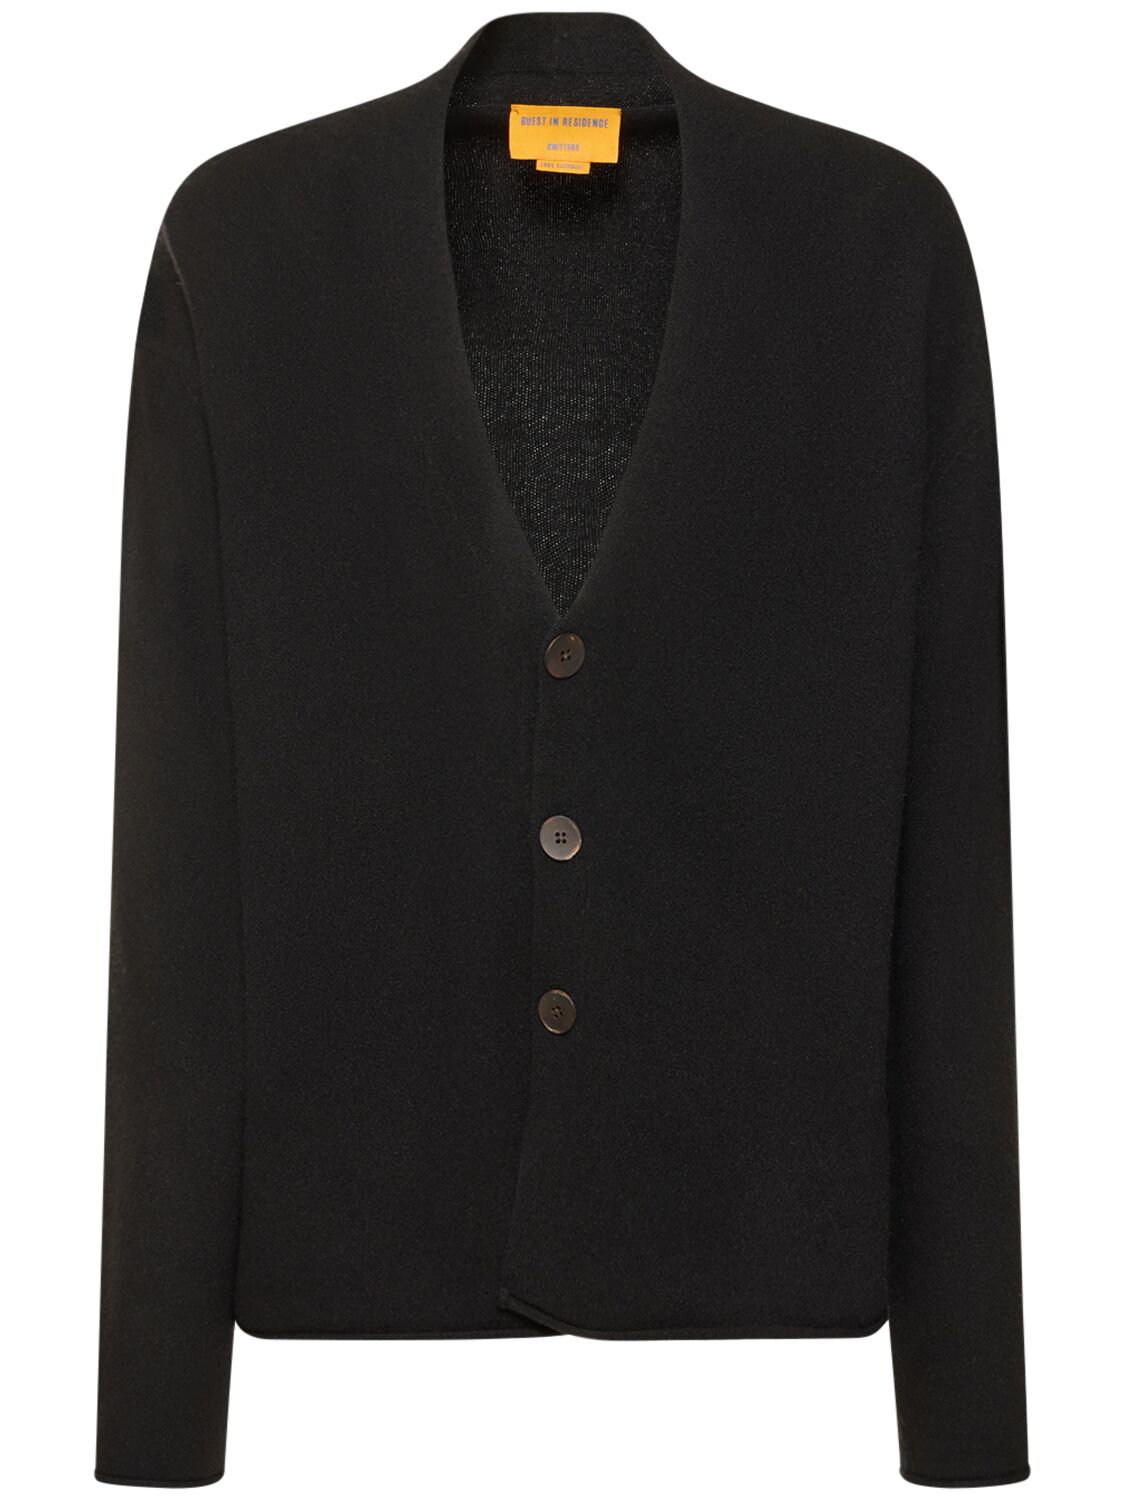 Guest In Residence Womens Black Everywear V-neck Cashmere Cardigan